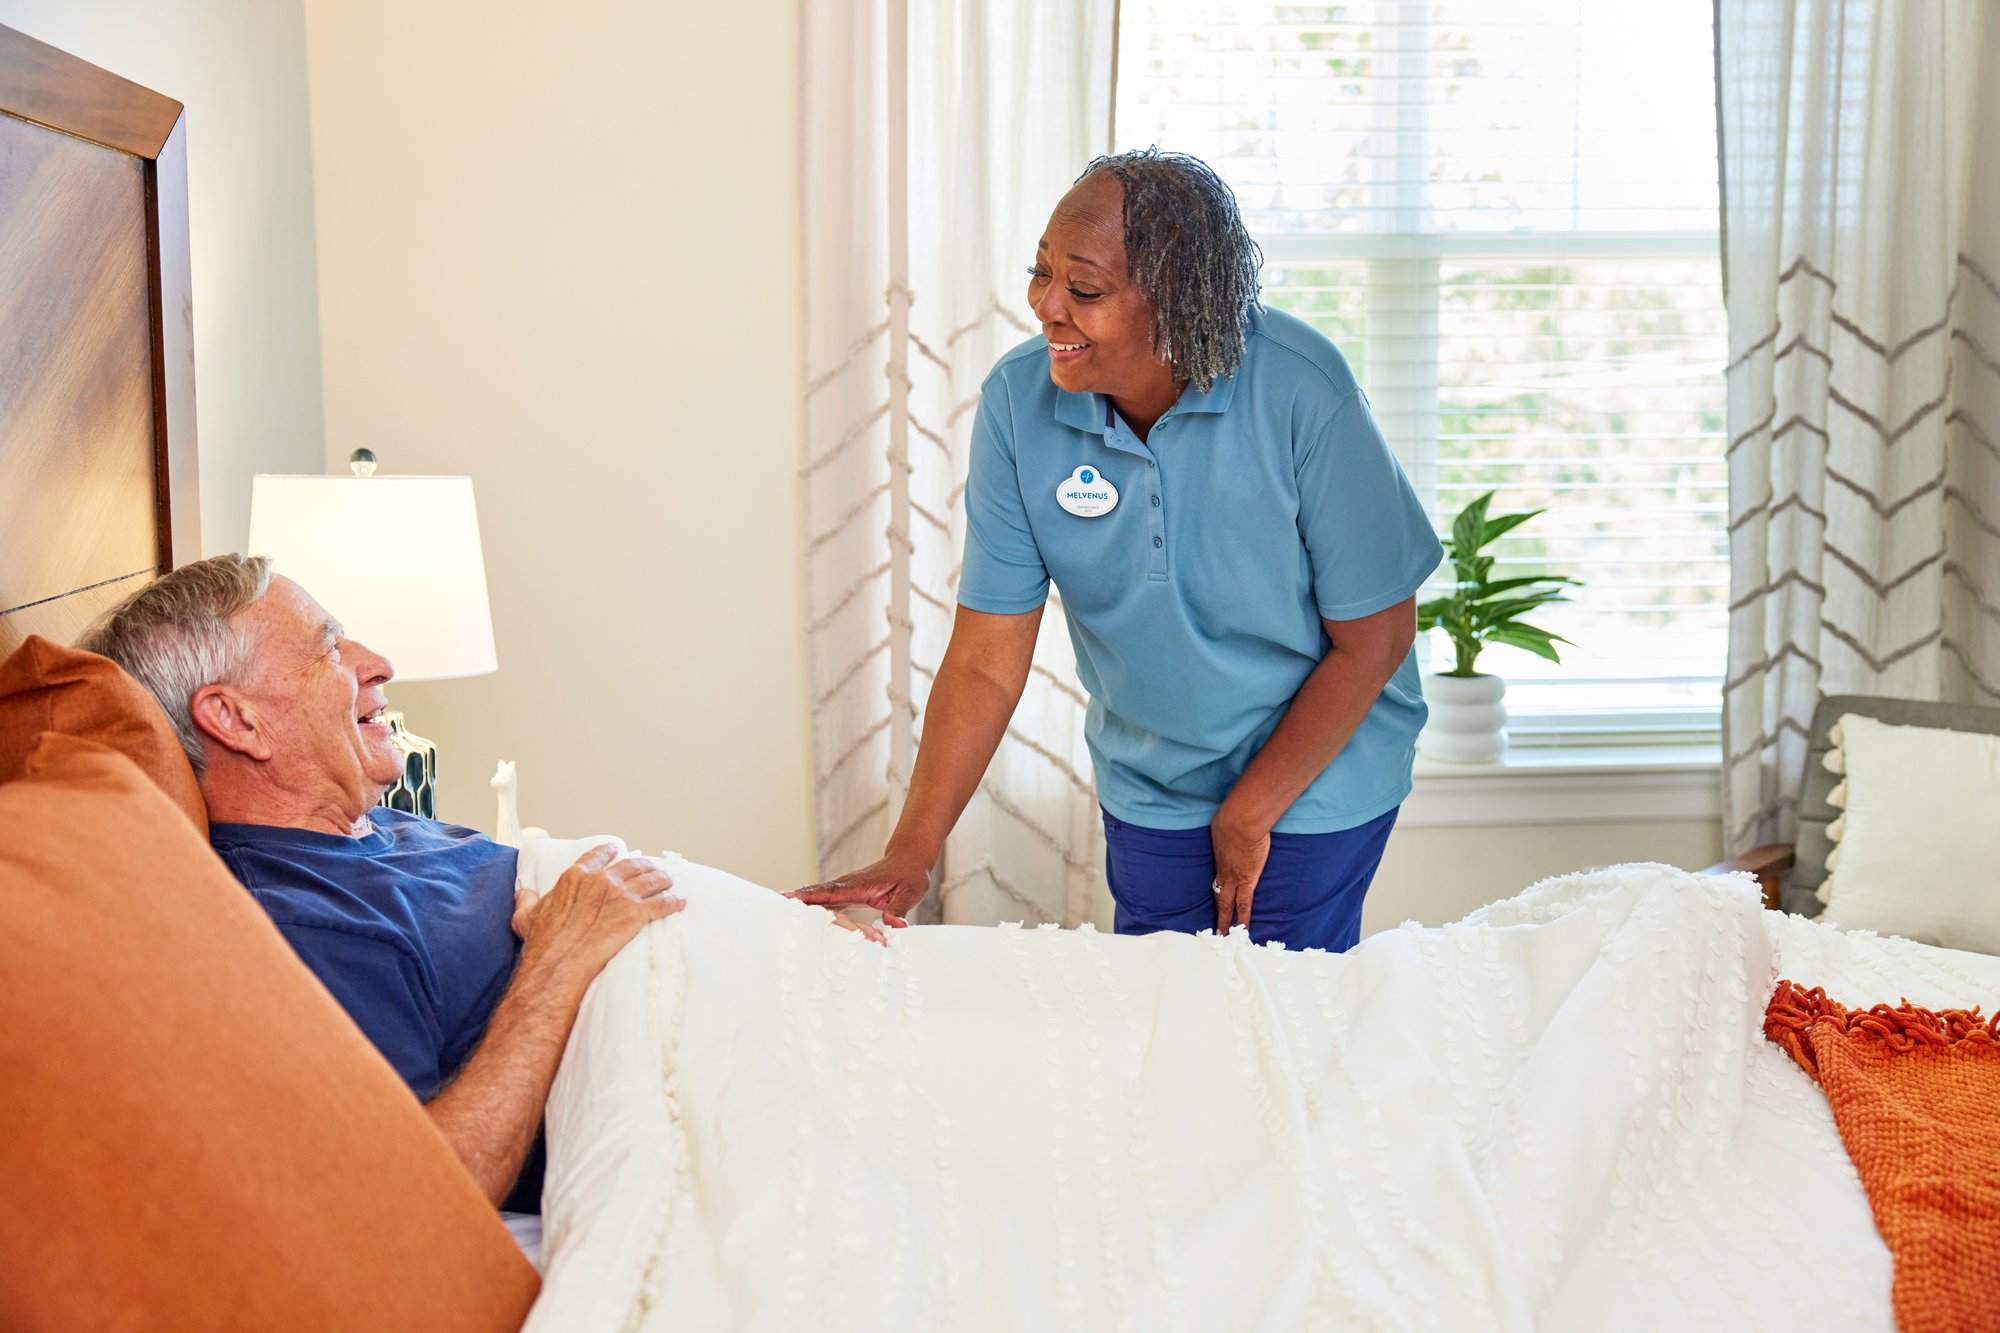 Resident care team member with a resident who is laying in bed